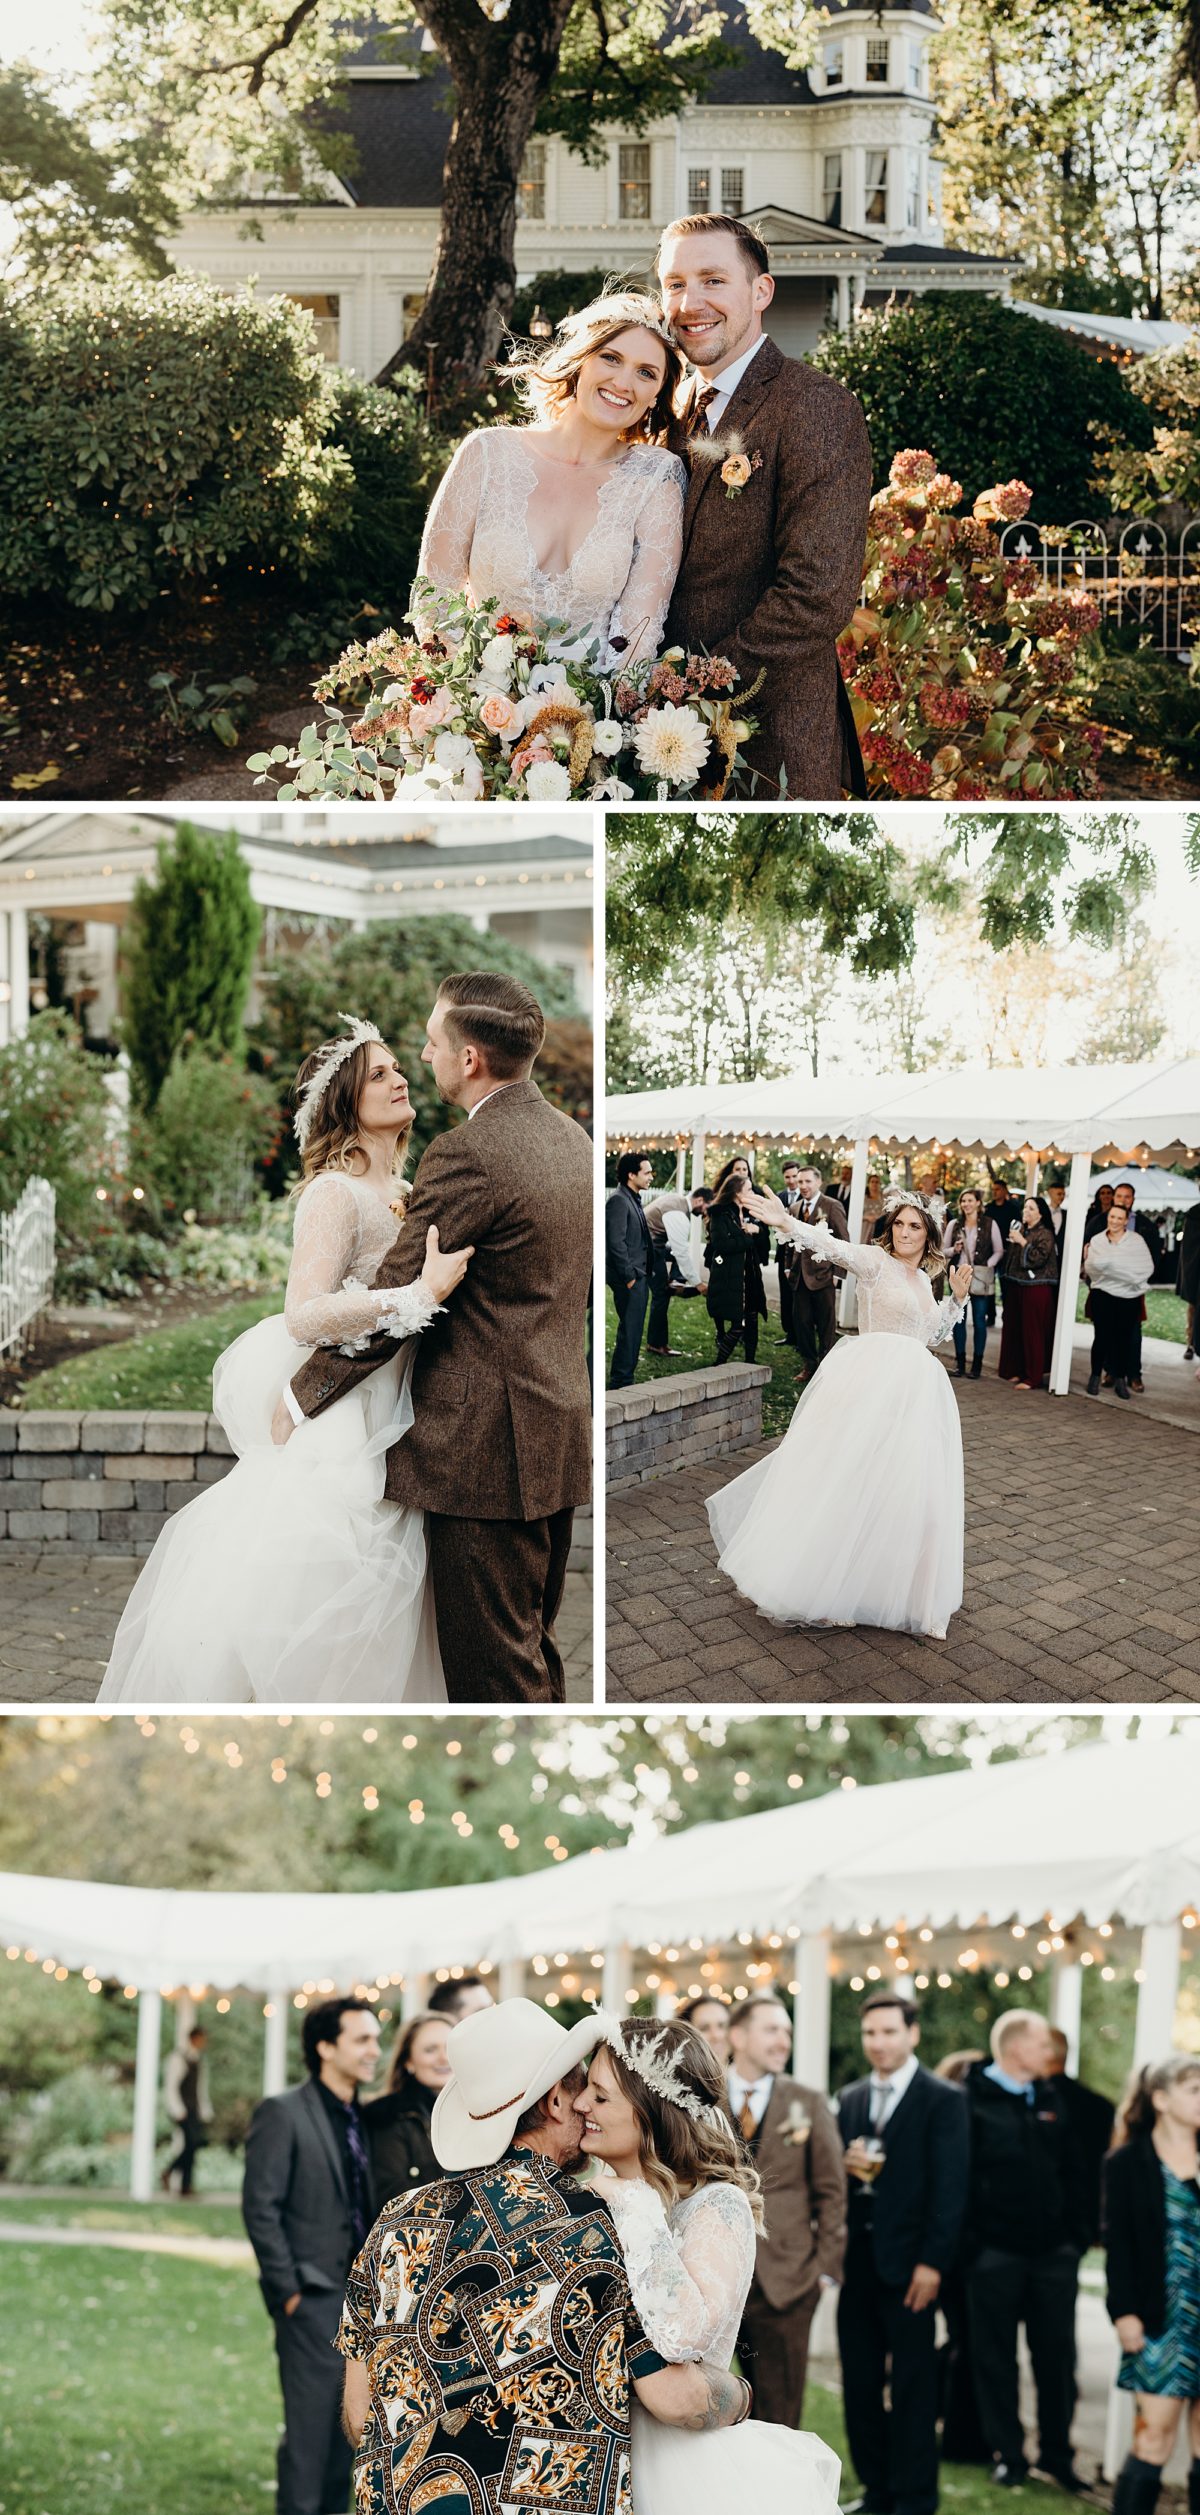 An outdoor first dance and father-daughter dance at The Victorian Belle in Portland, Oregon.